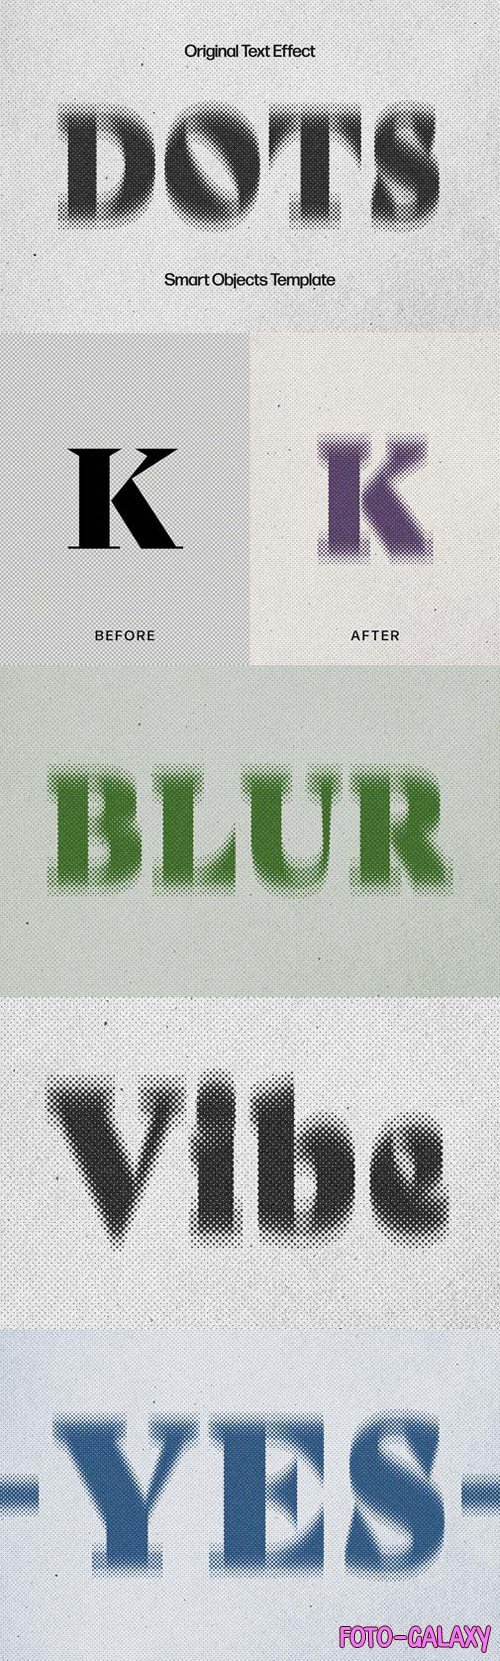 Blurred Dots Photoshop Text Effect